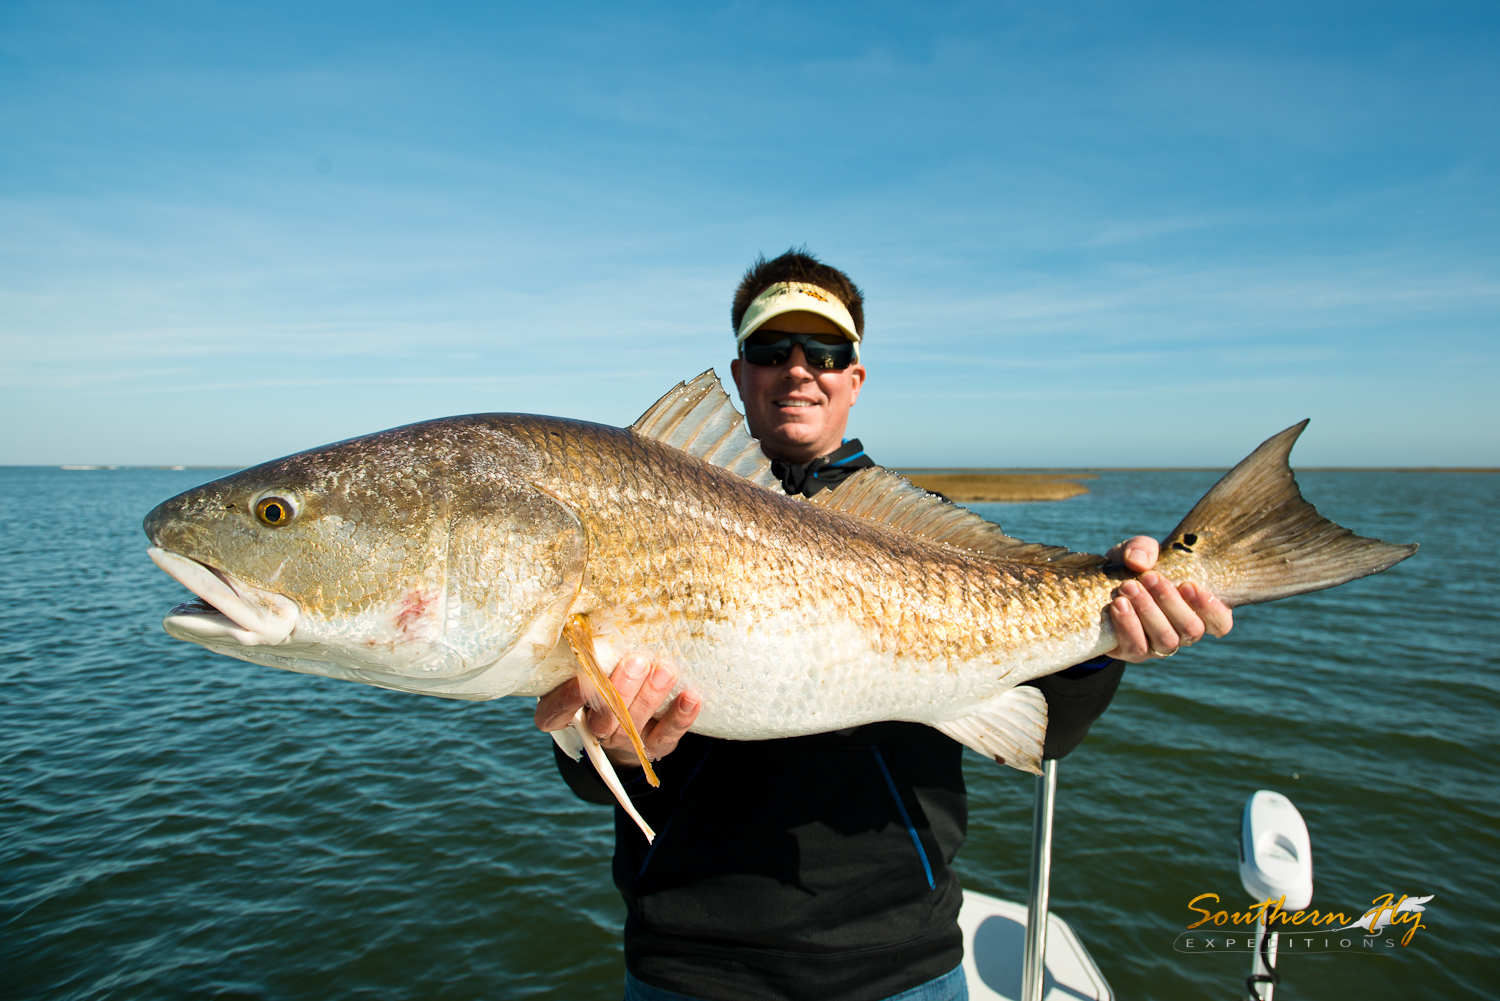 Shallow Water Light Tackle Guide New Orleans Southern Fly Expeditions